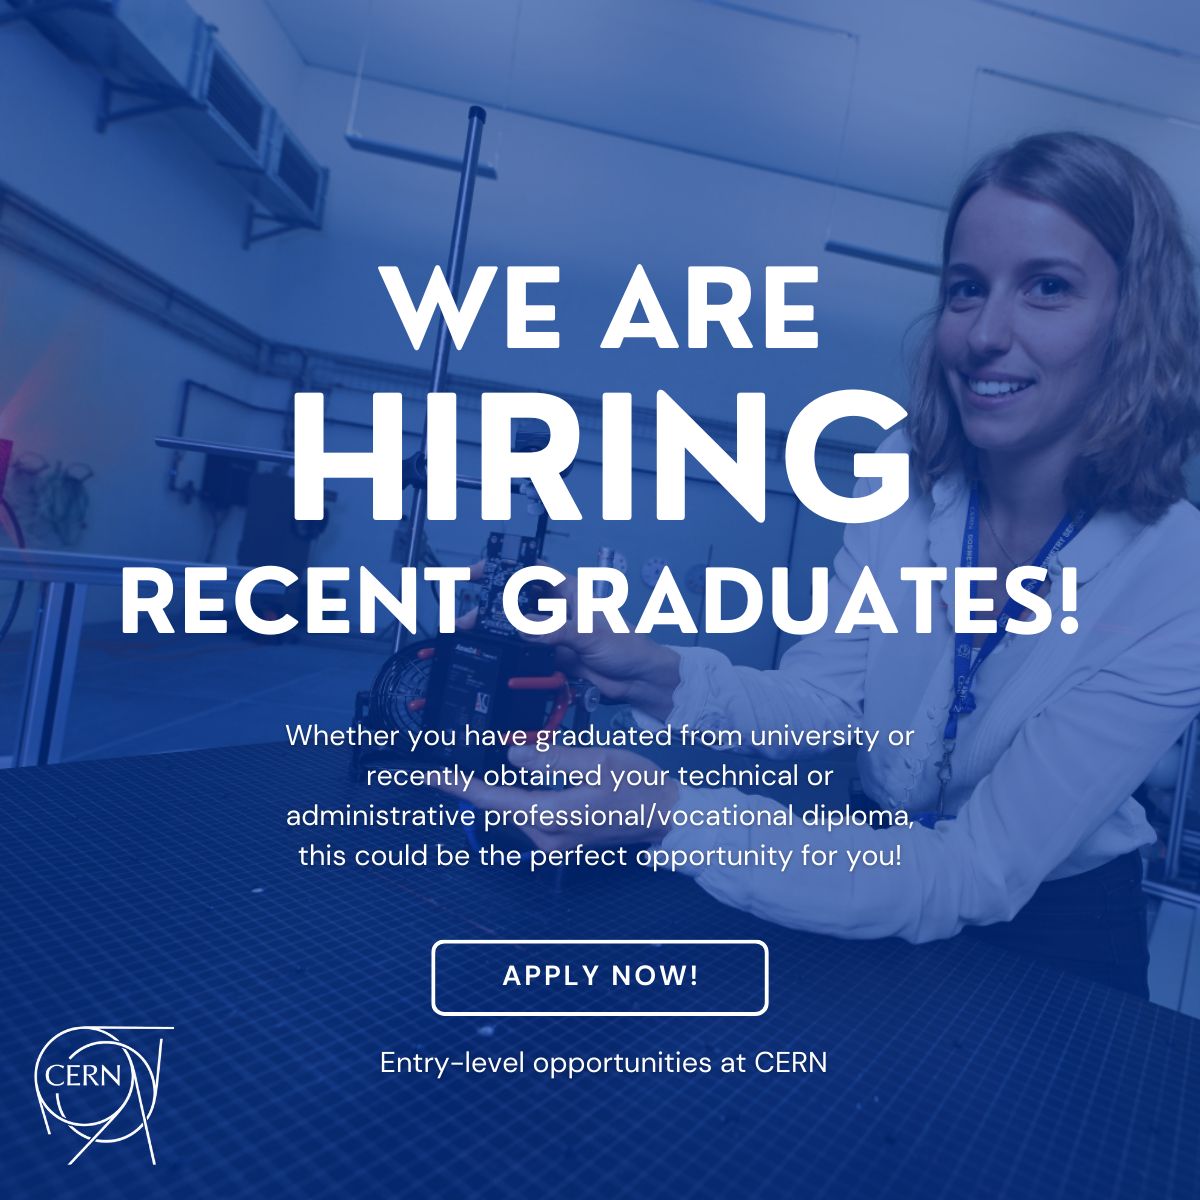 🚀 FINAL CALL! 🌍 CERN’s Early Career Professionals applications are now open!
Learn more: shorturl.at/gxyVY

Deadline: 19.01.2024.

#CERN #scienceeducation #techcareer #stem #CareerOpportunity #TakePart #opportunity #hiring #jobs #Geneva #recentgraduates #earlycareers